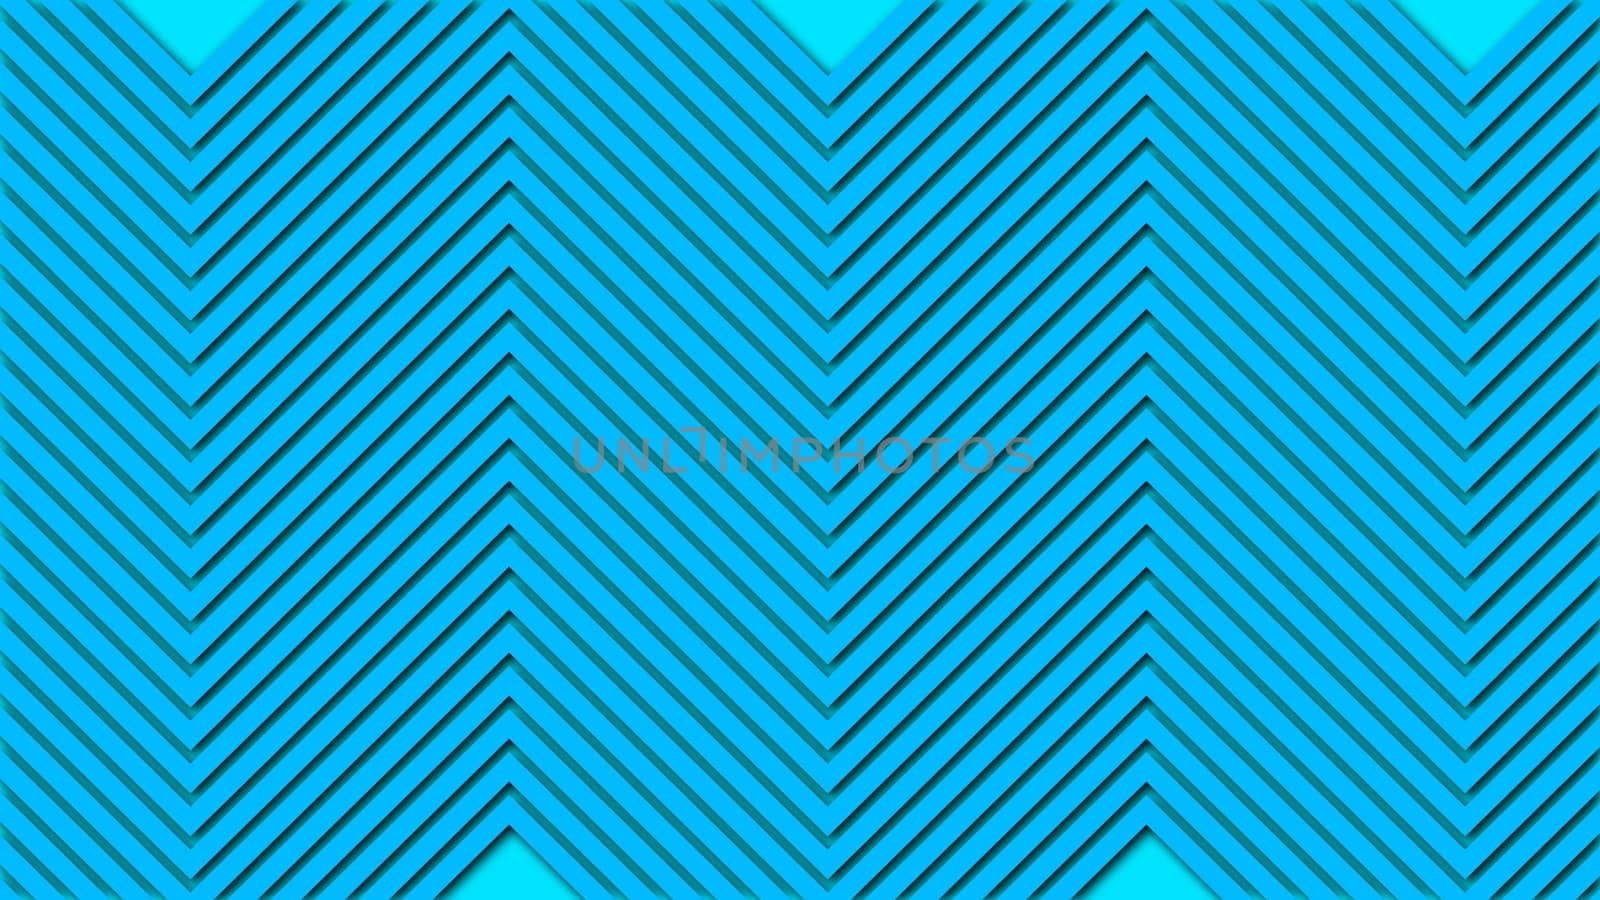 Zig zag shapes with horizontal lines, bright festive stripes, sharp and jagged waves, 3d rendering backdrop